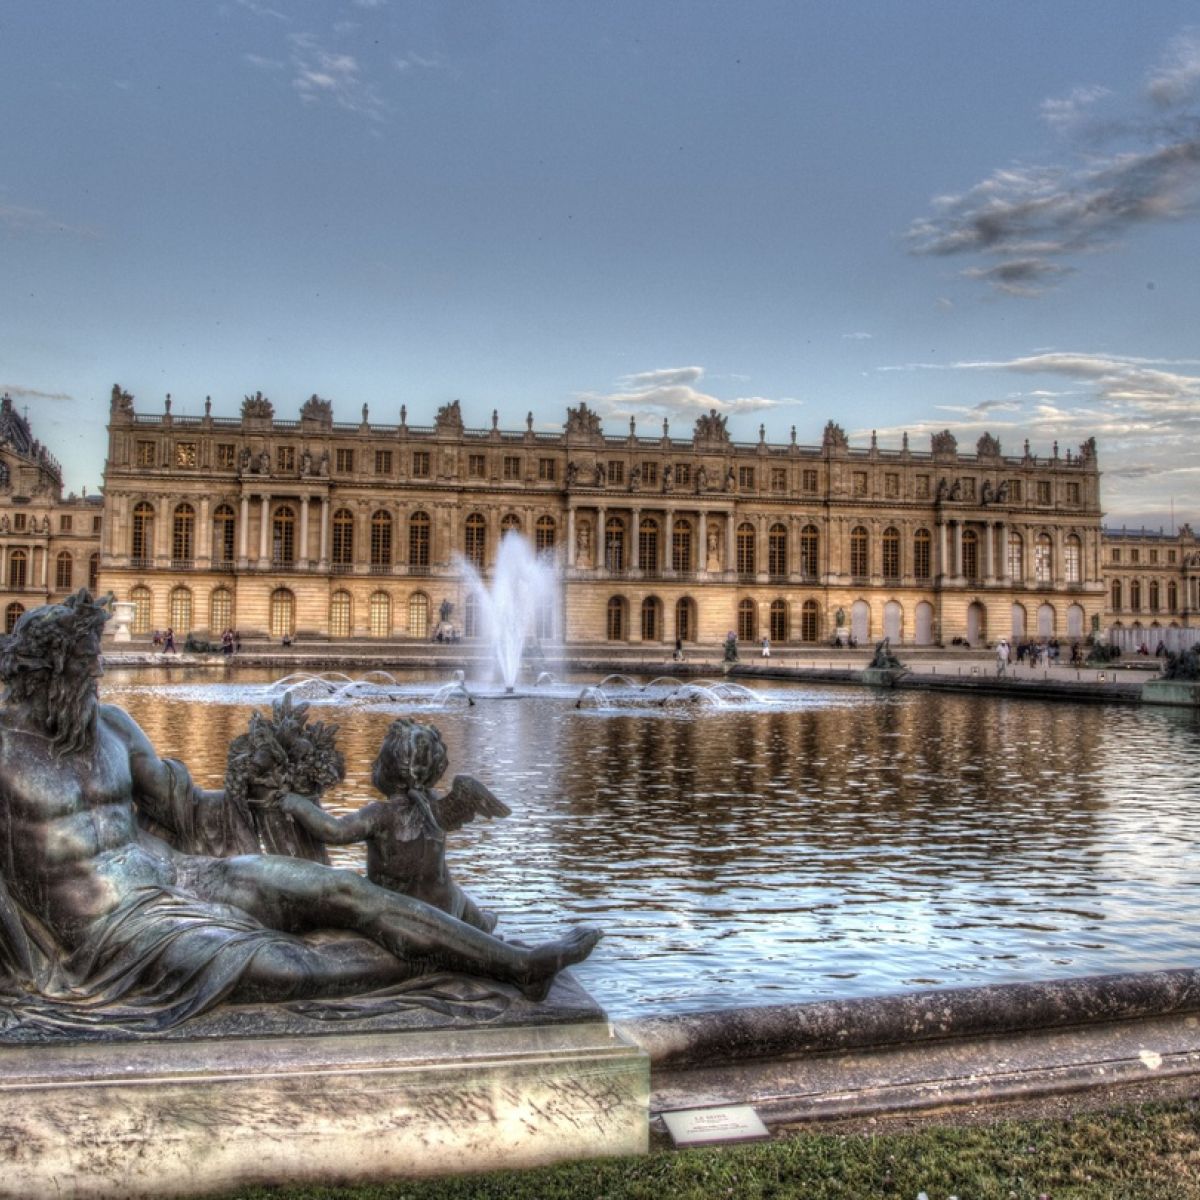 Europe Or North America Quiz Palace of Versailles